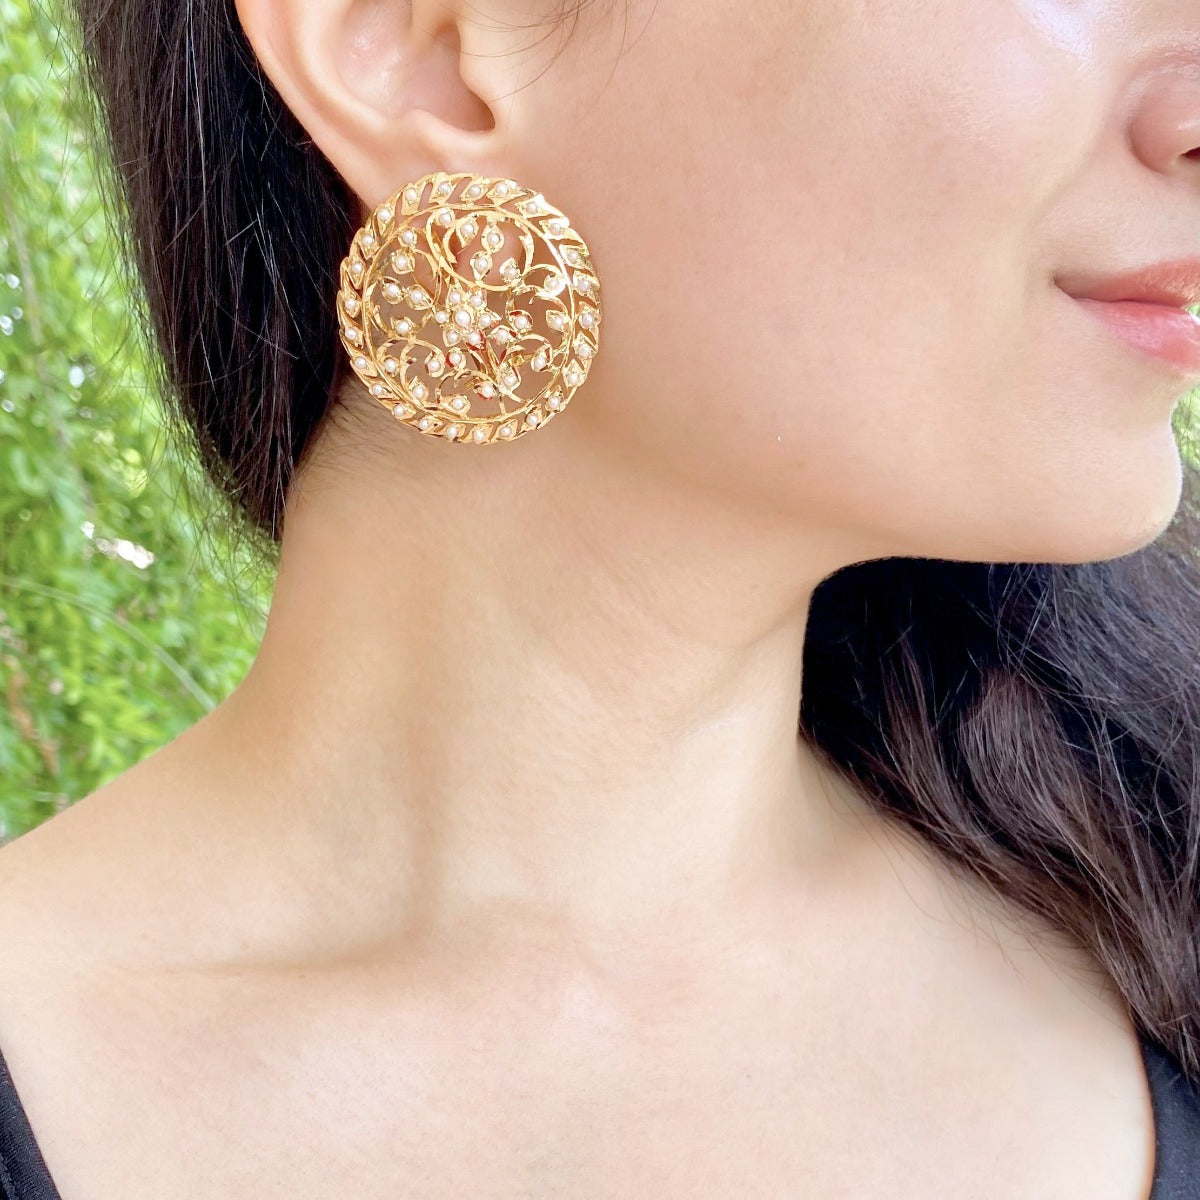 22k gold earrings studded with freshwater pearls